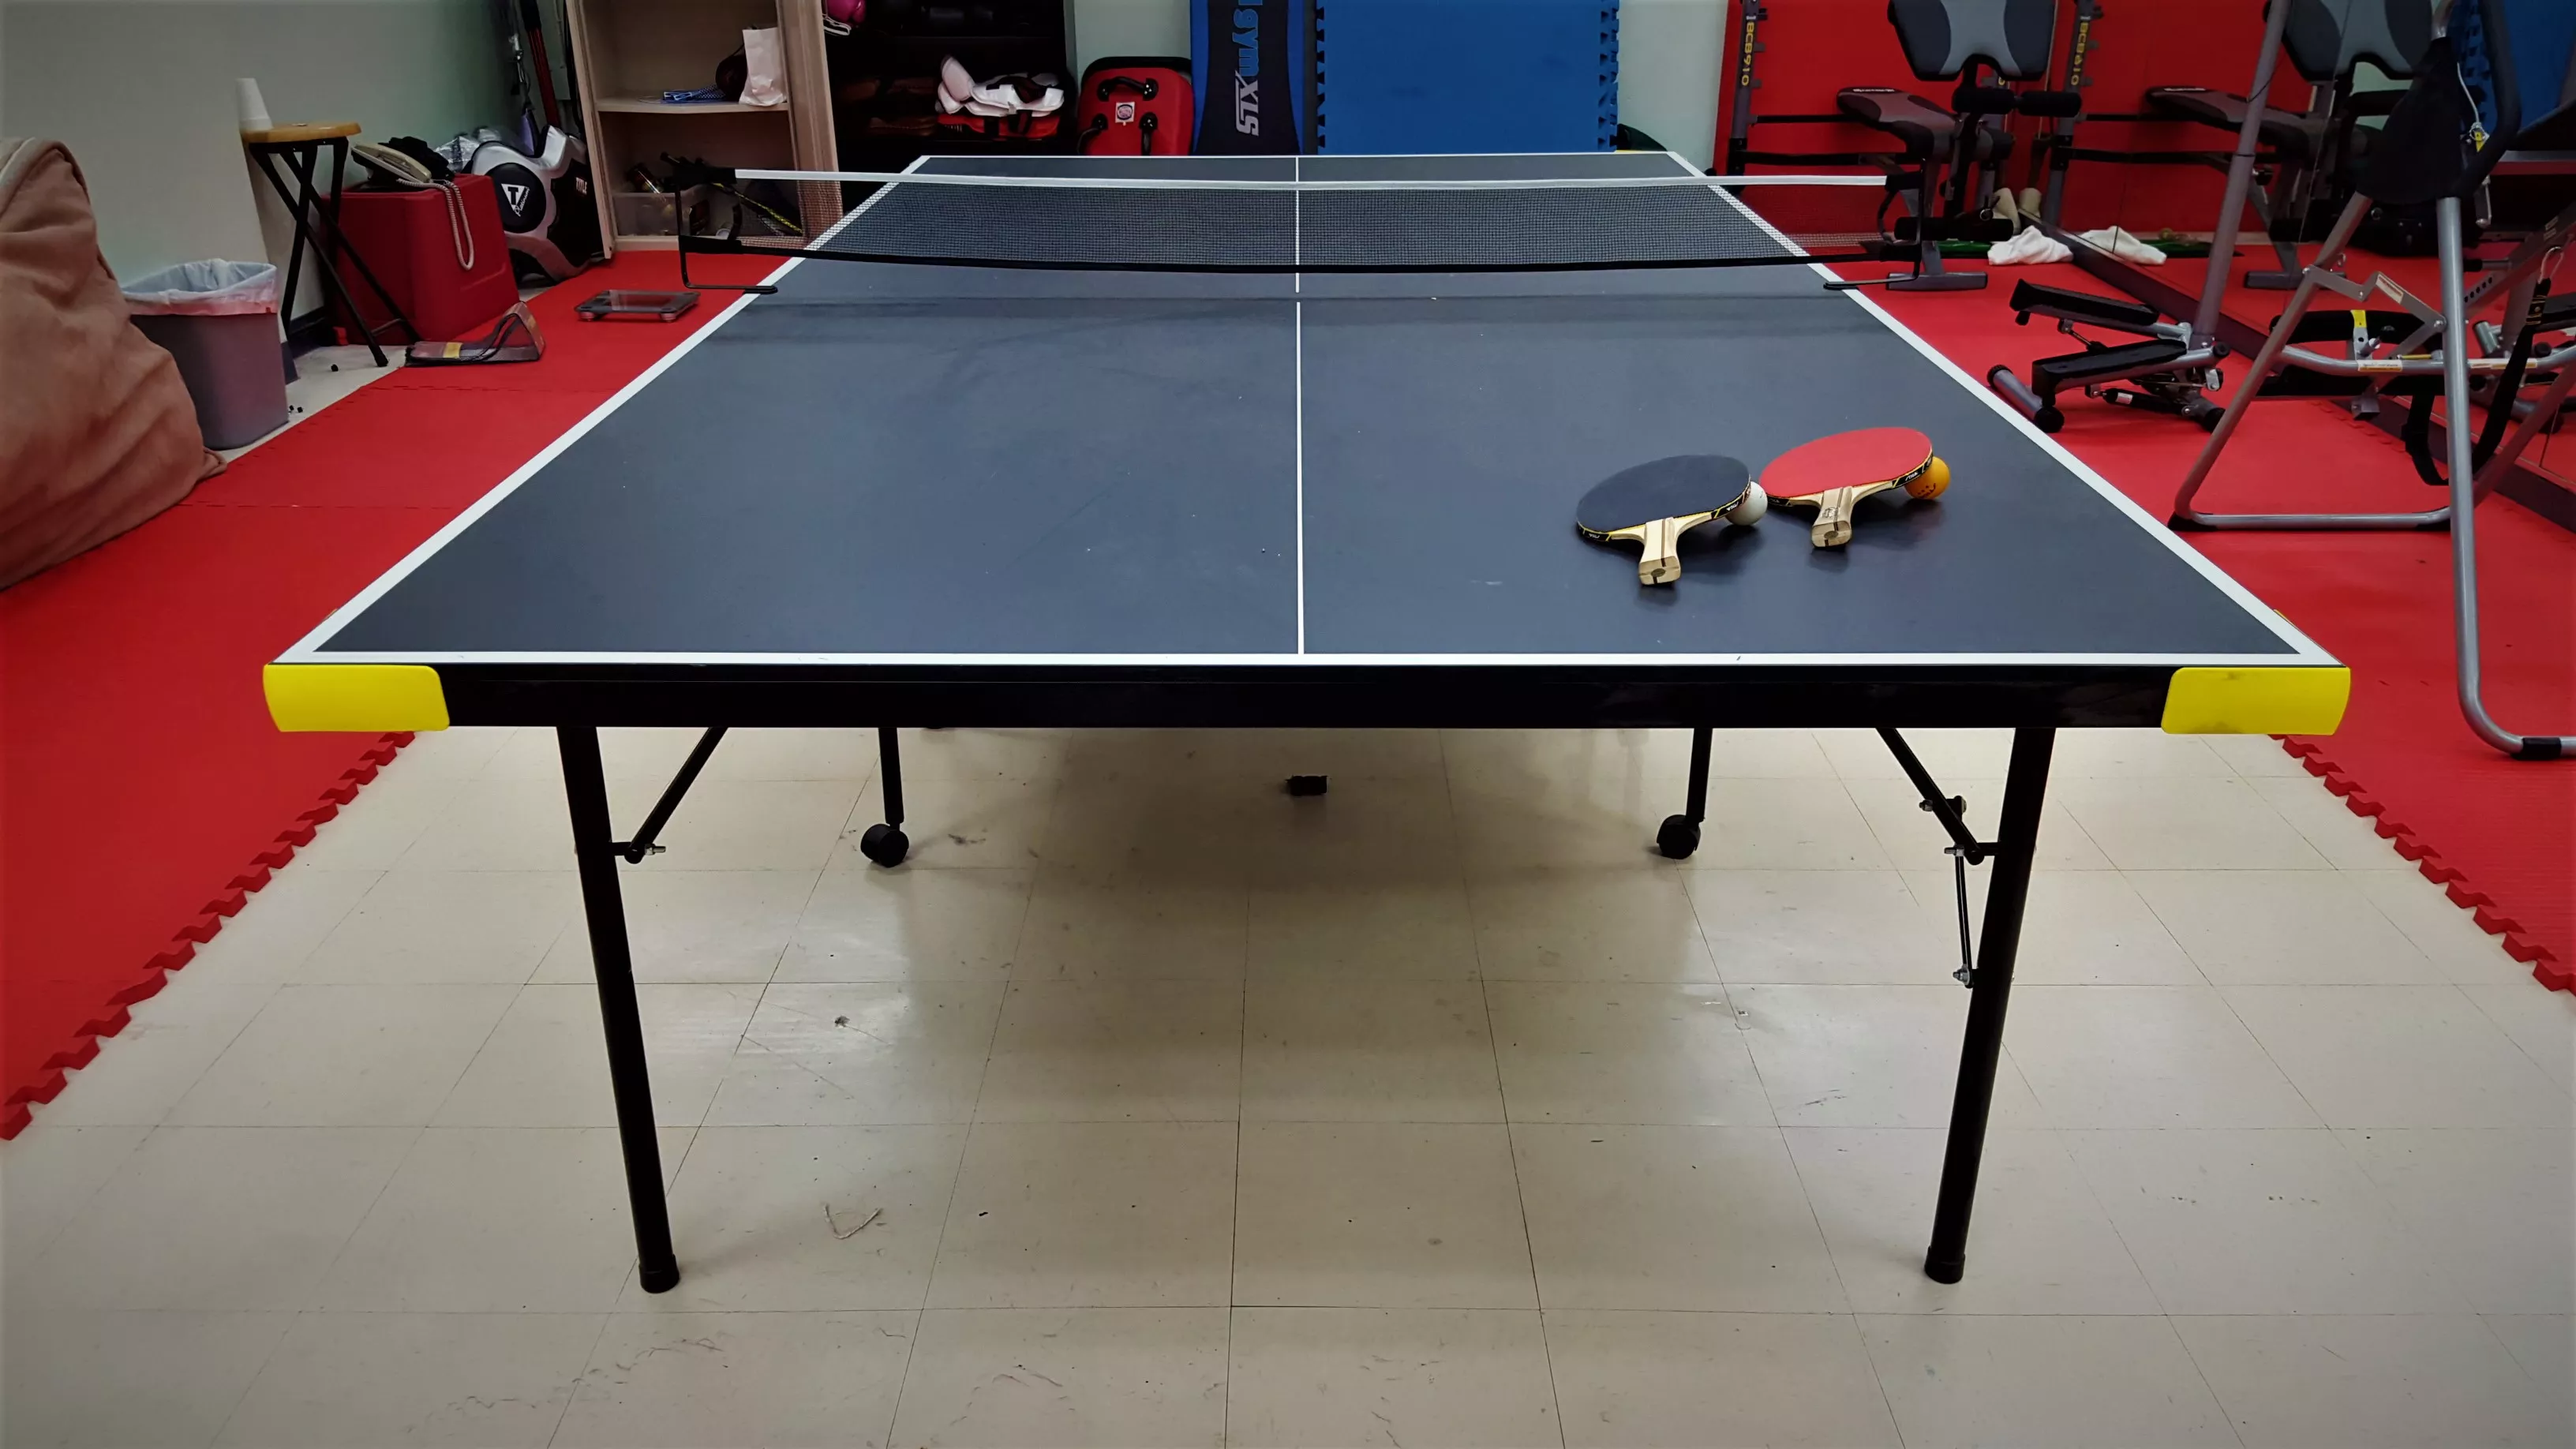 Table View Tennis Club in South Africa, Africa | Ping-Pong - Rated 0.8